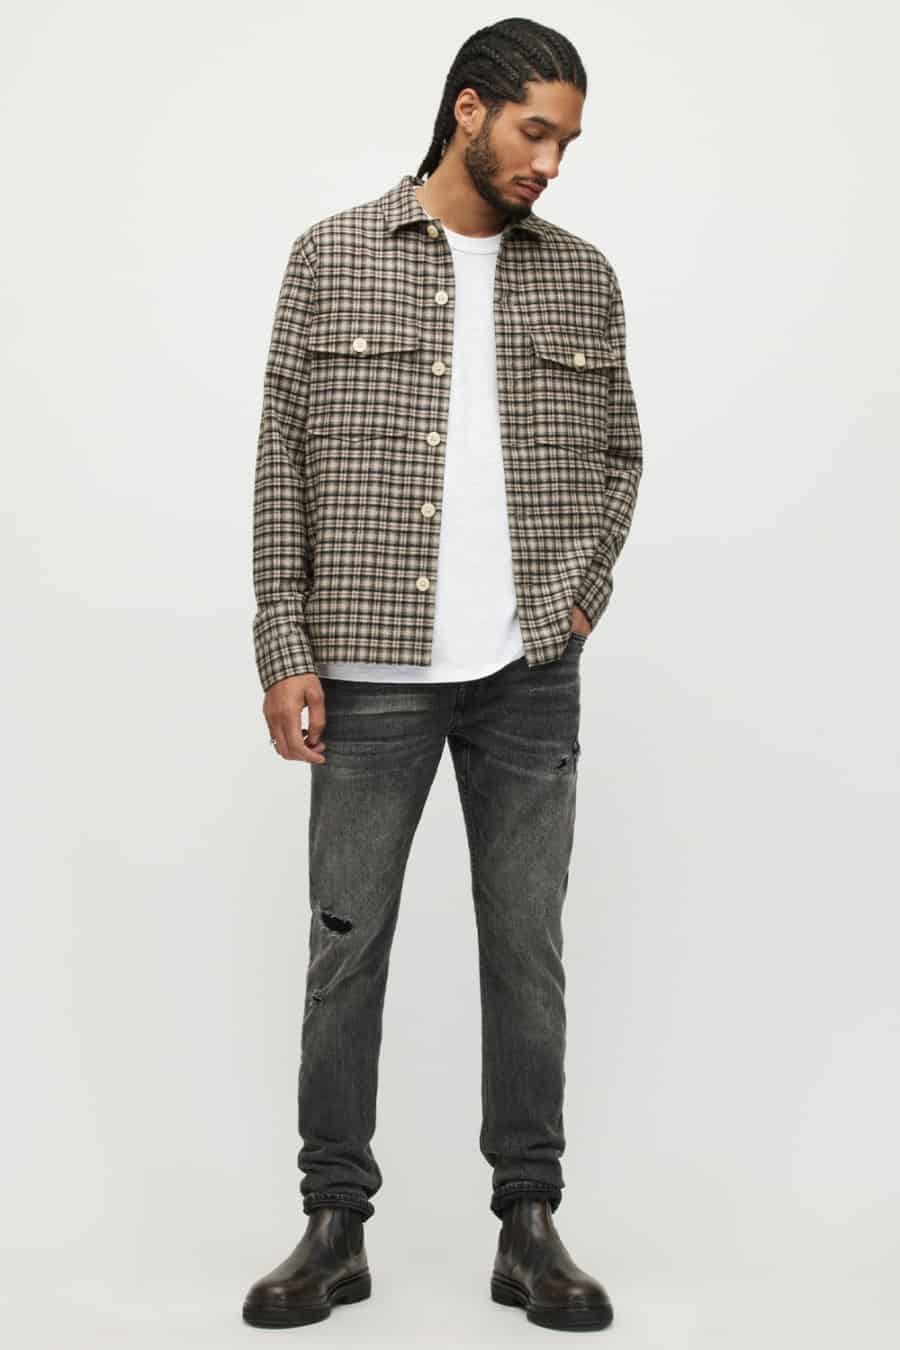 Men's white tee and checked overshirt worn with jeans and boots